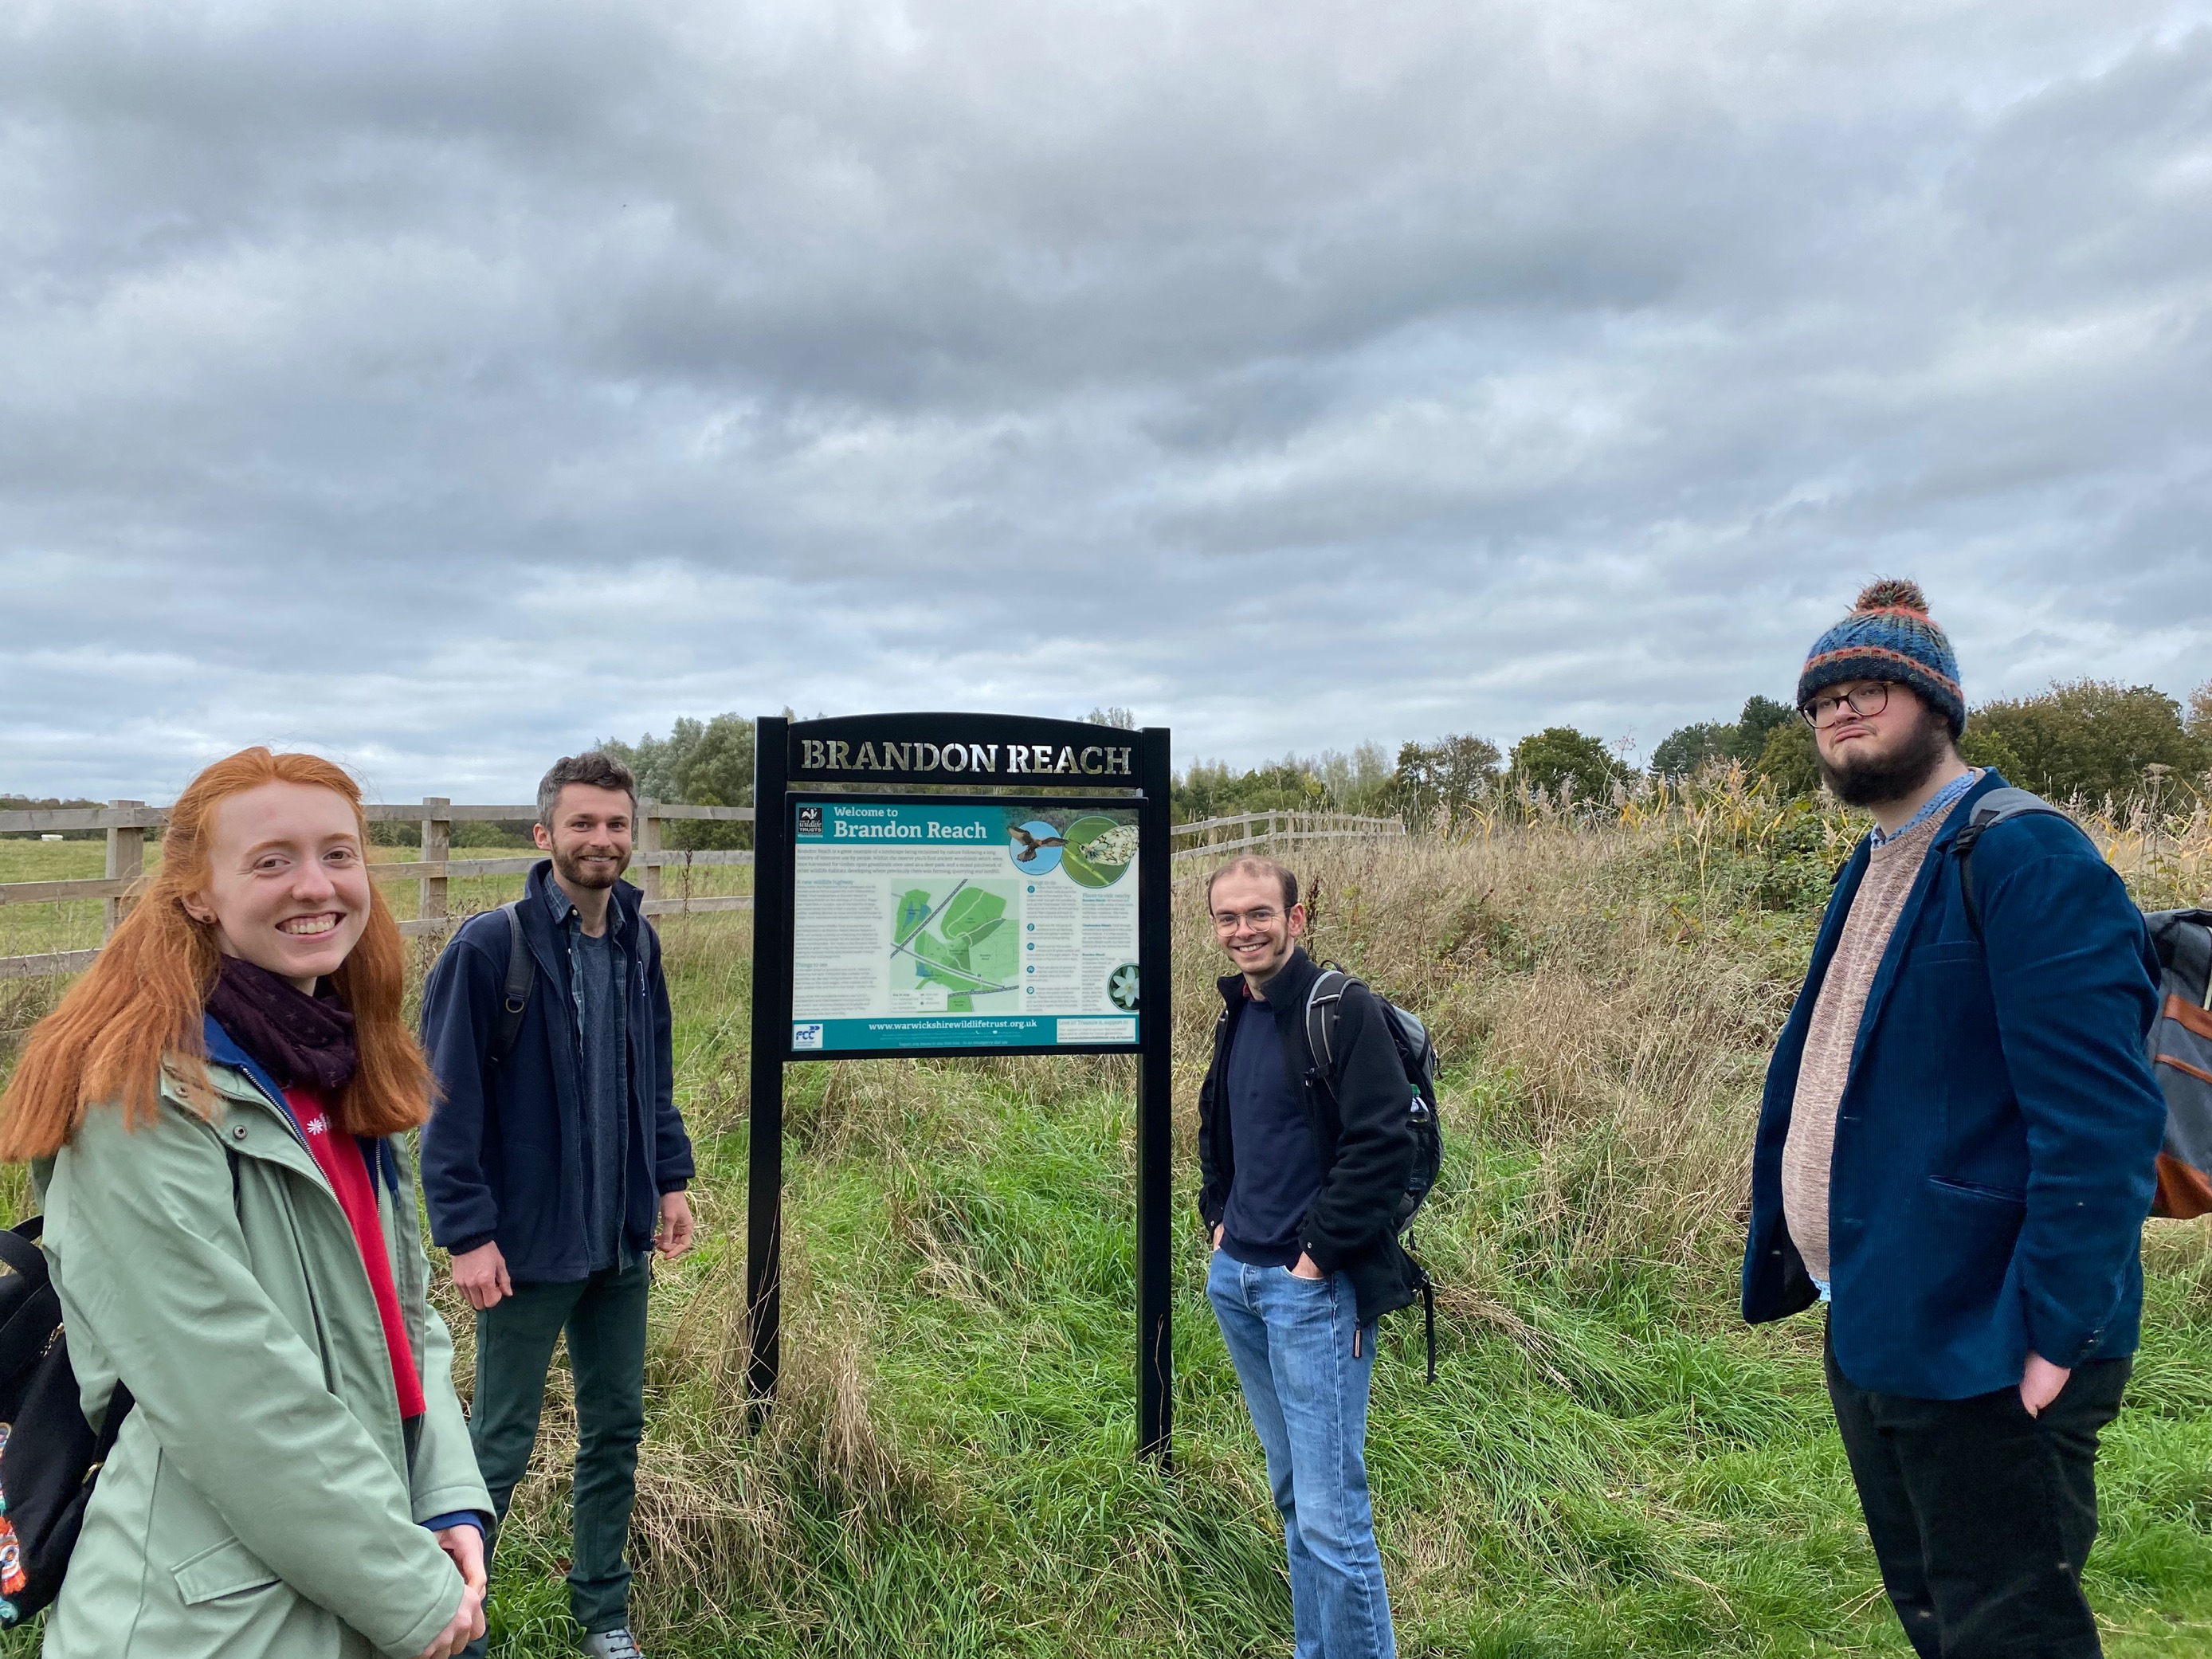 Some of the project volunteers on a visit to the former colliery site, taken here at the entrance to the Brandon Reach nature reserve. From left to right are: Kiera (3rd year UG, History), Daniel (Warwickshire Wildlife Trust), Pierre (Oral History Network administrator), and Dan (3rd year UG, History)